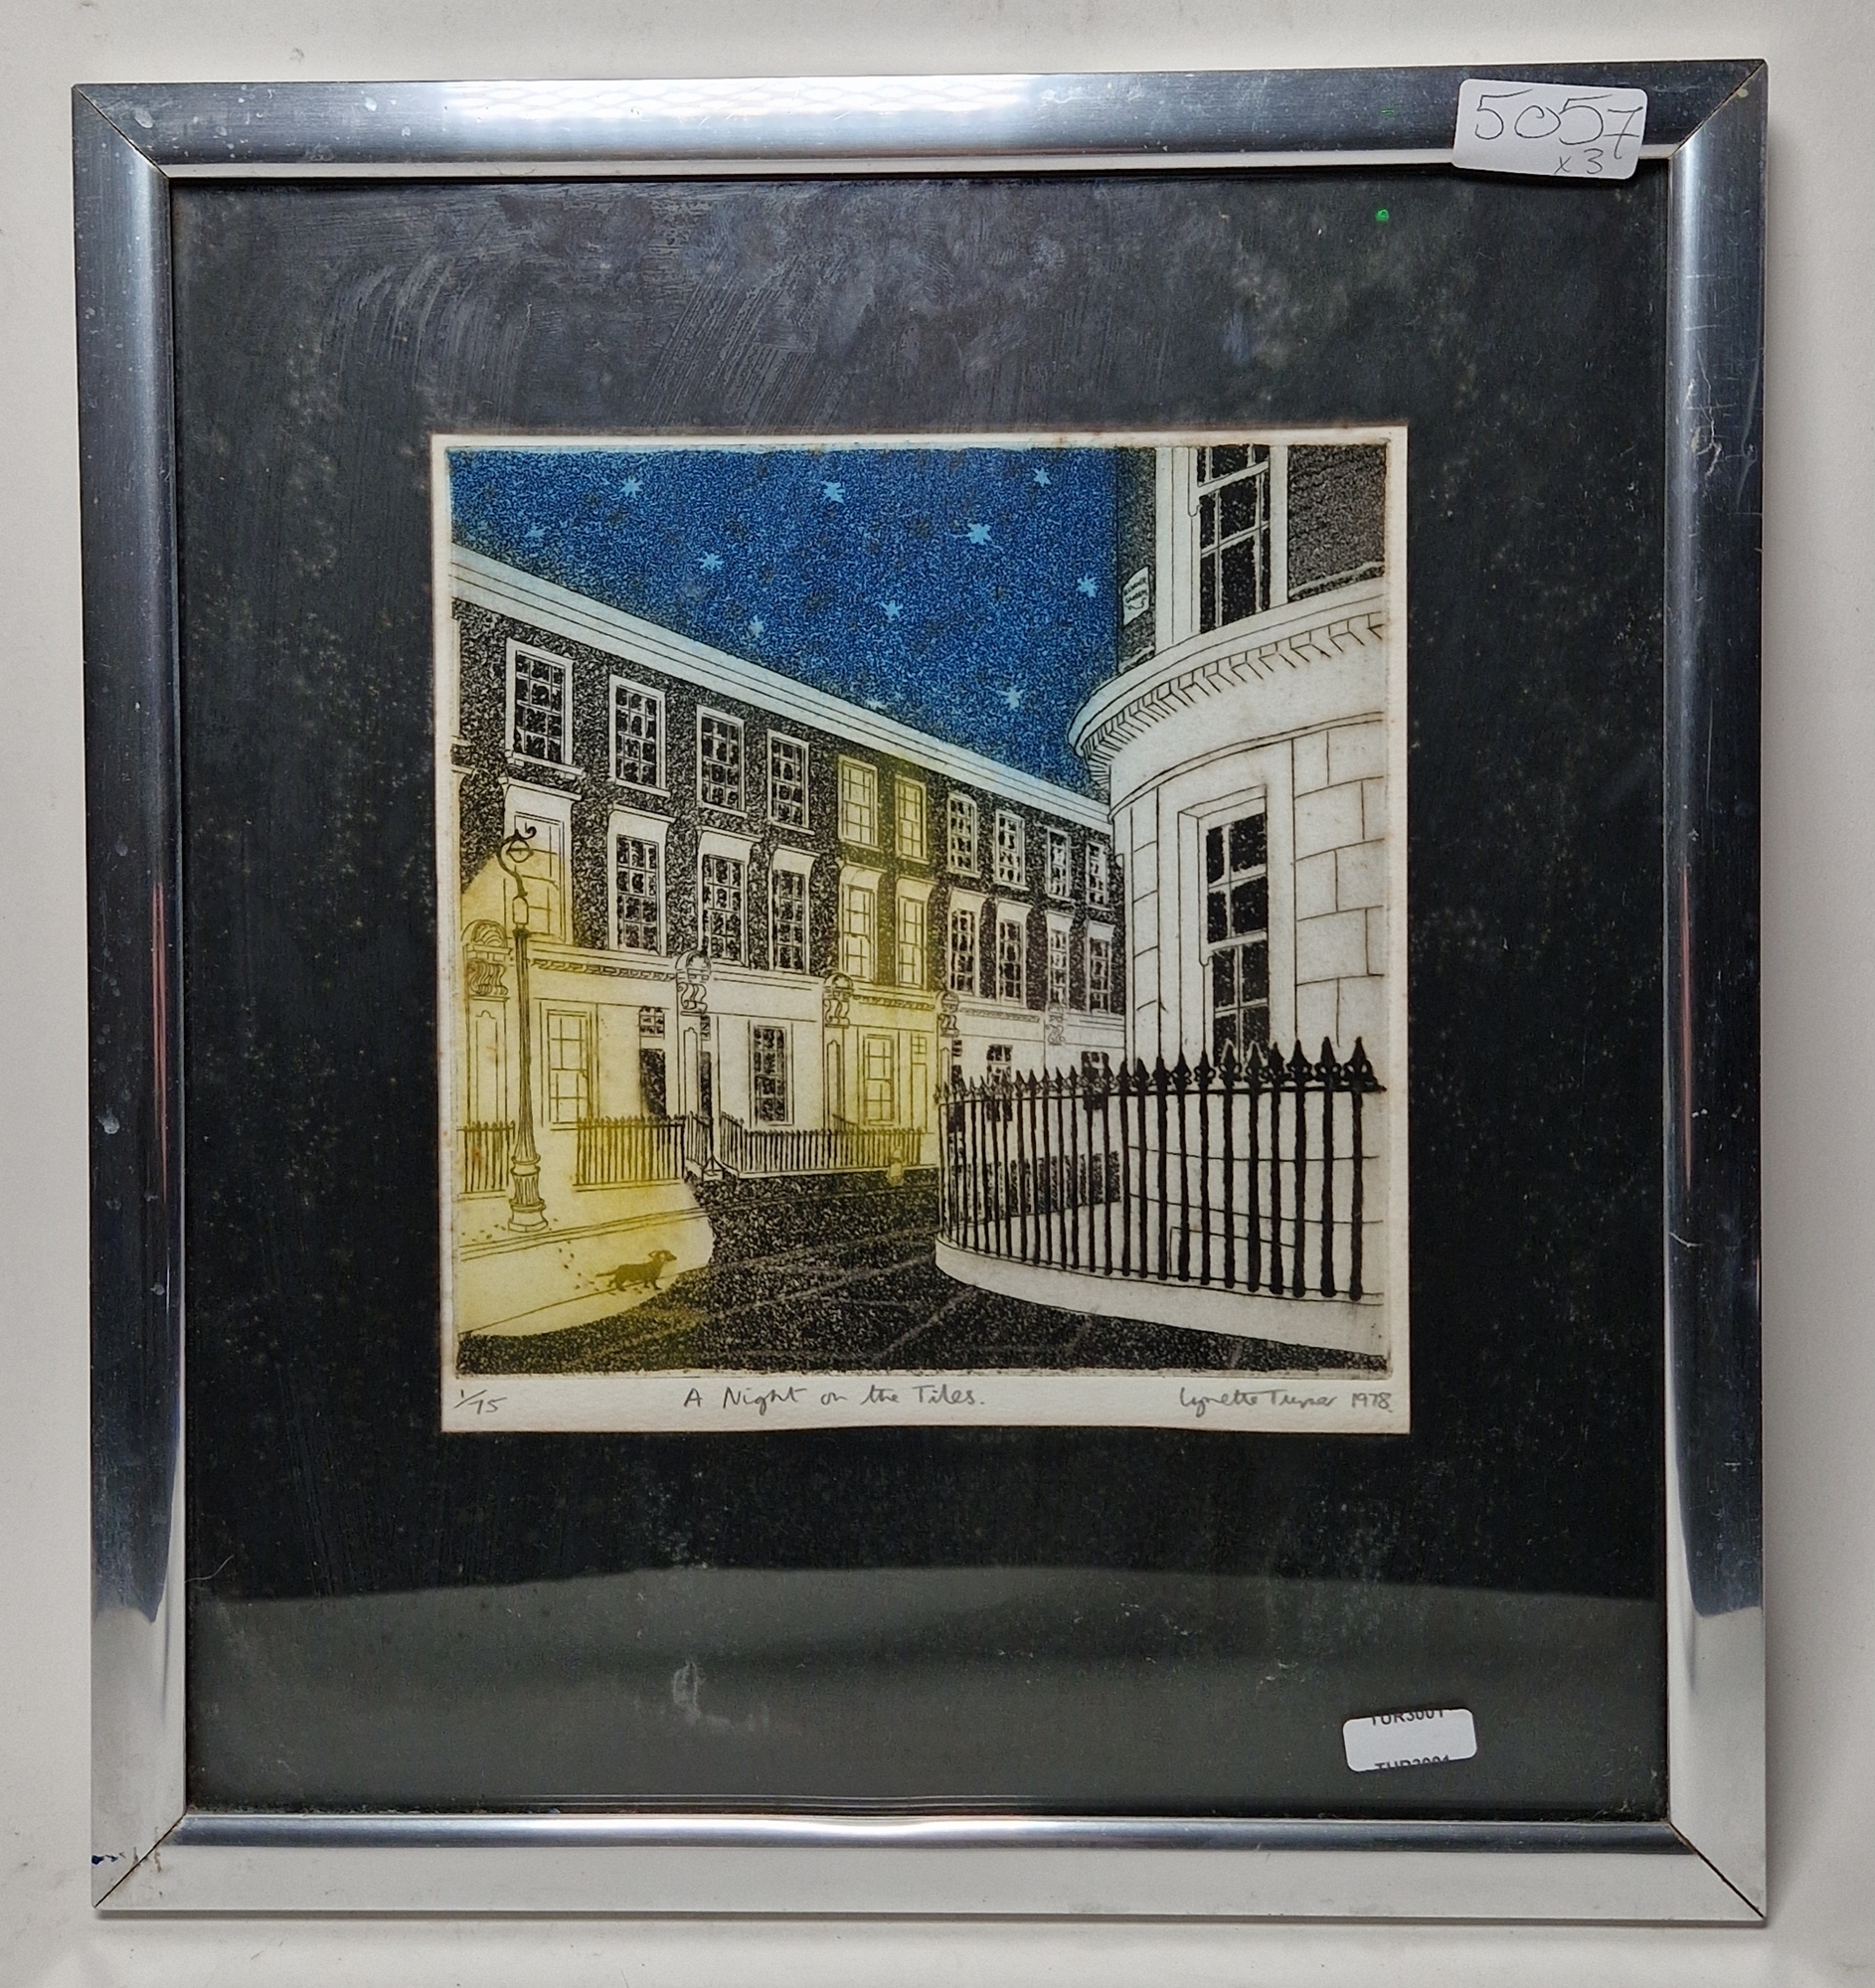 Lynette Turner (20th century) Etching and aquatint "A Night on the Tiles", limited edition - Image 8 of 8